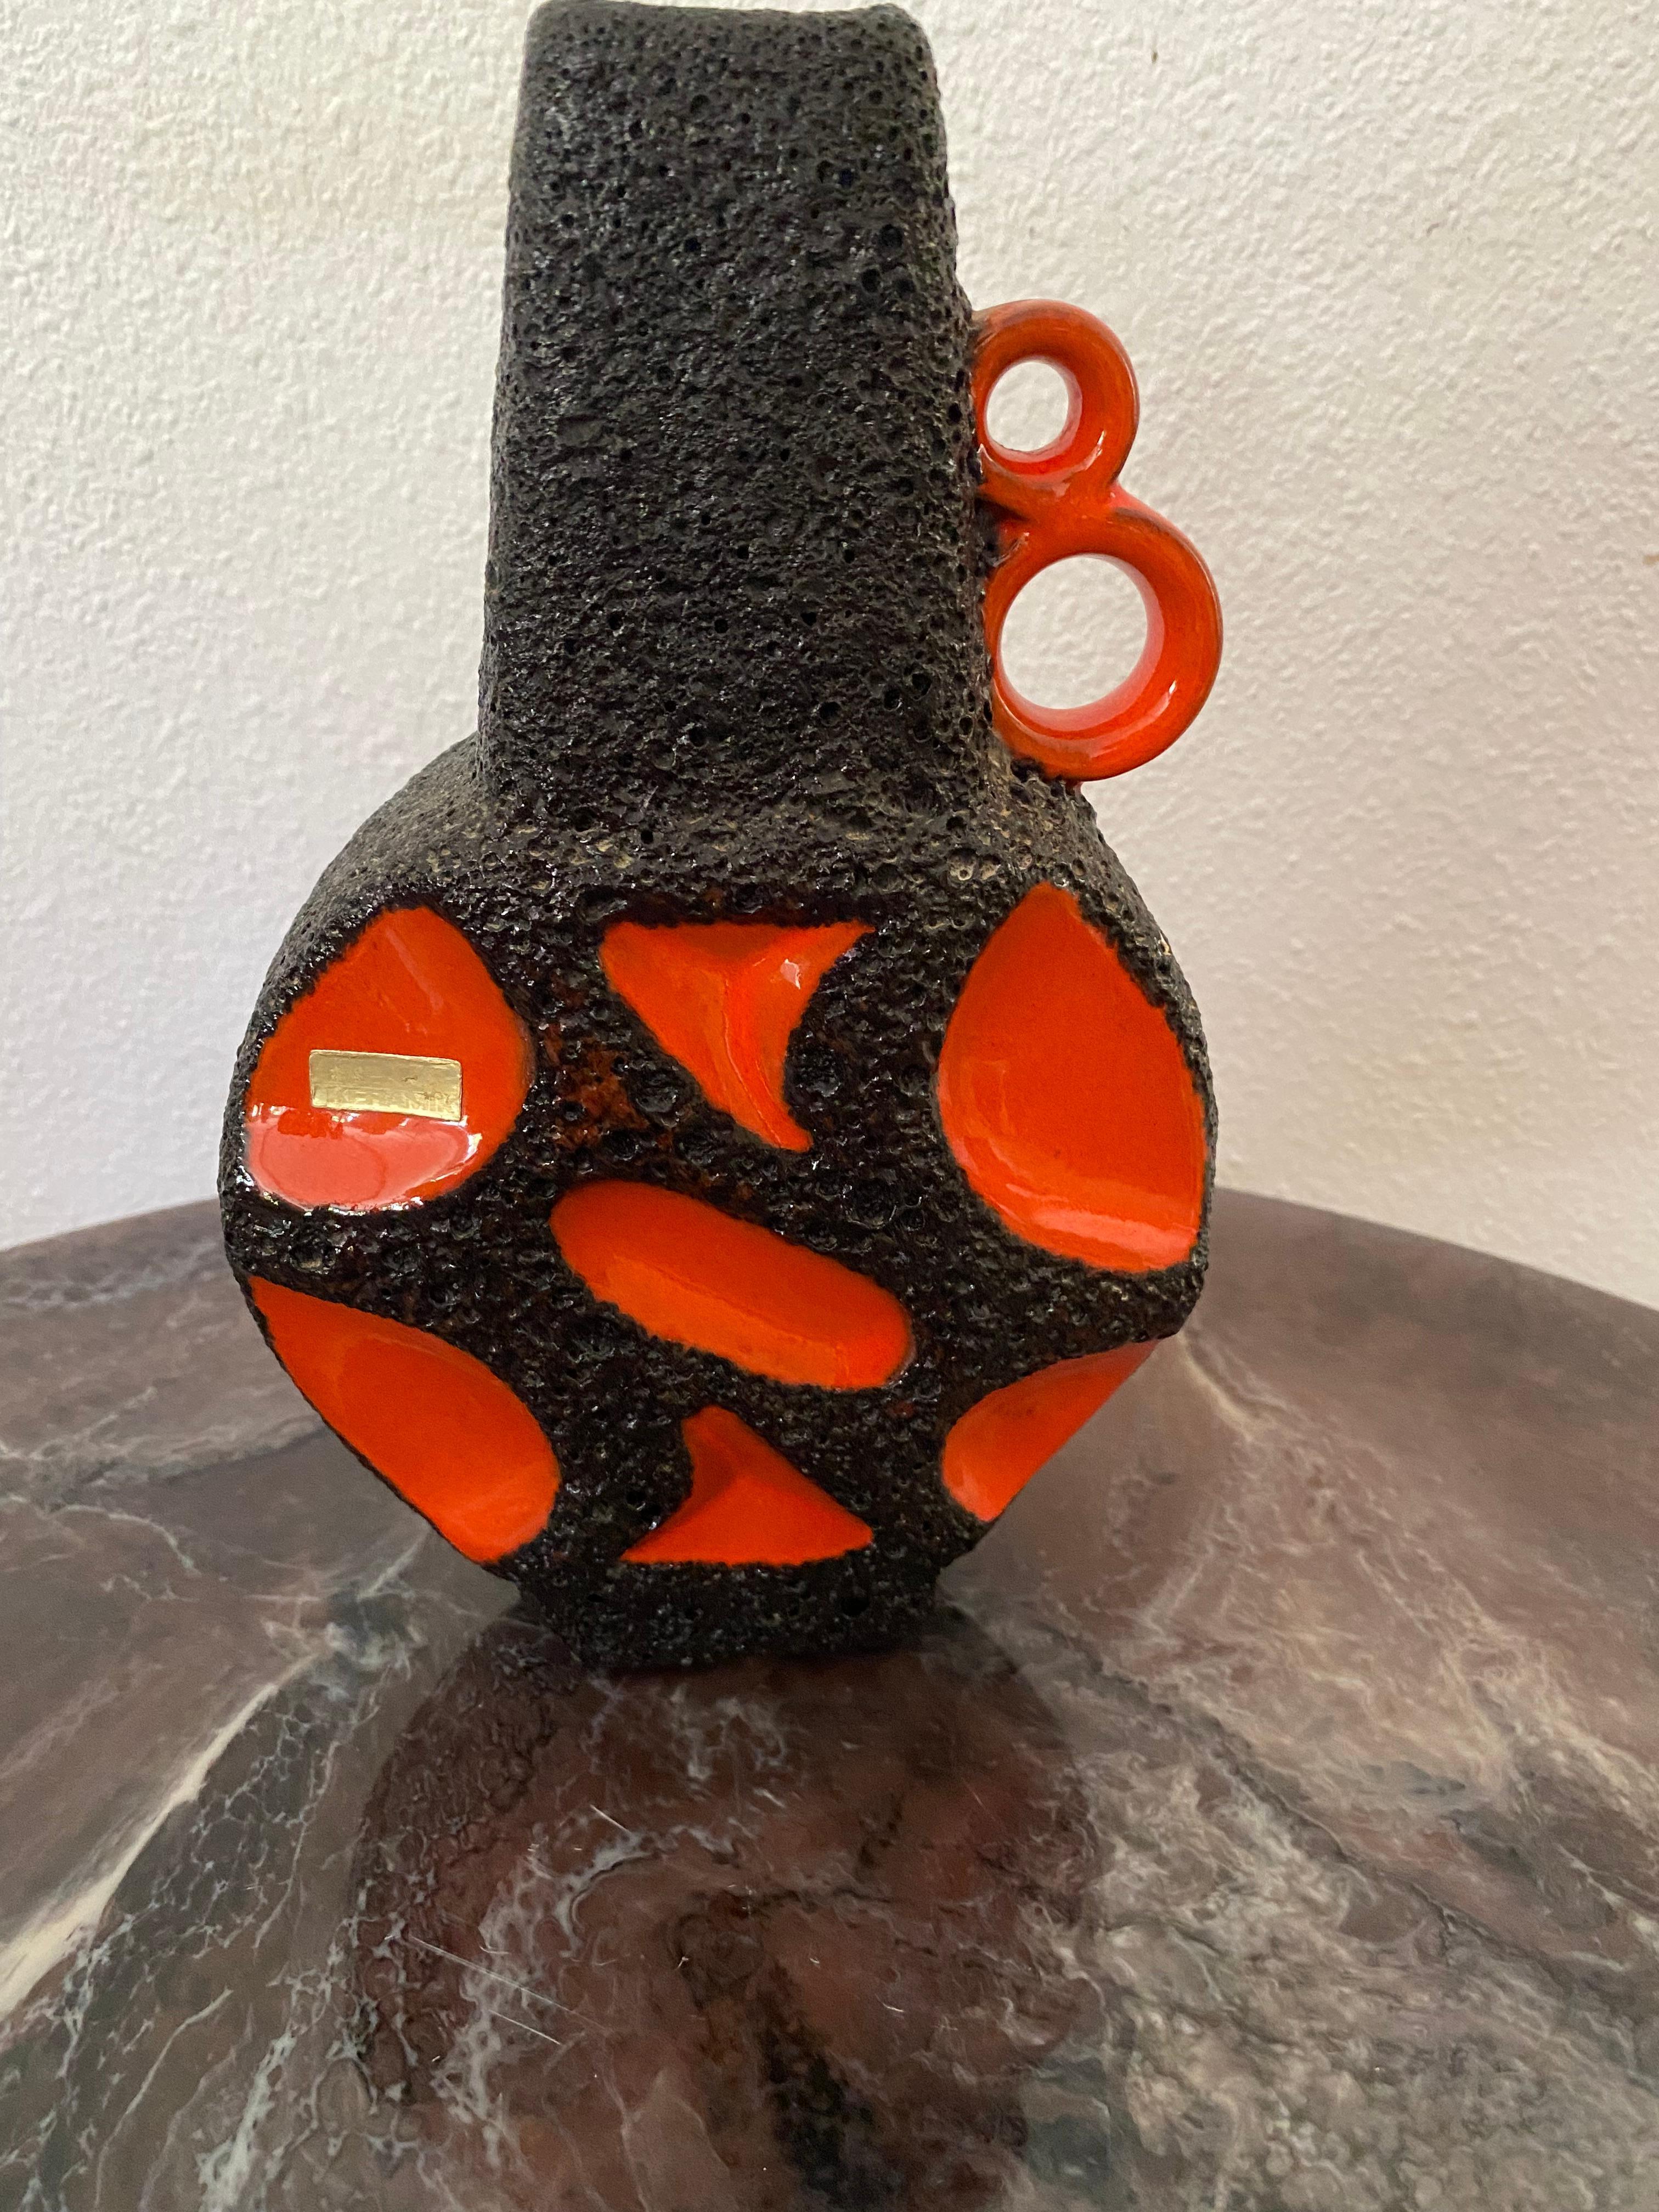 A Roth Keramik vase, orange outlined with black lava. These vases are very sought after. Model is also called The Banjo, due to its shape.
Original sticker/label present.

